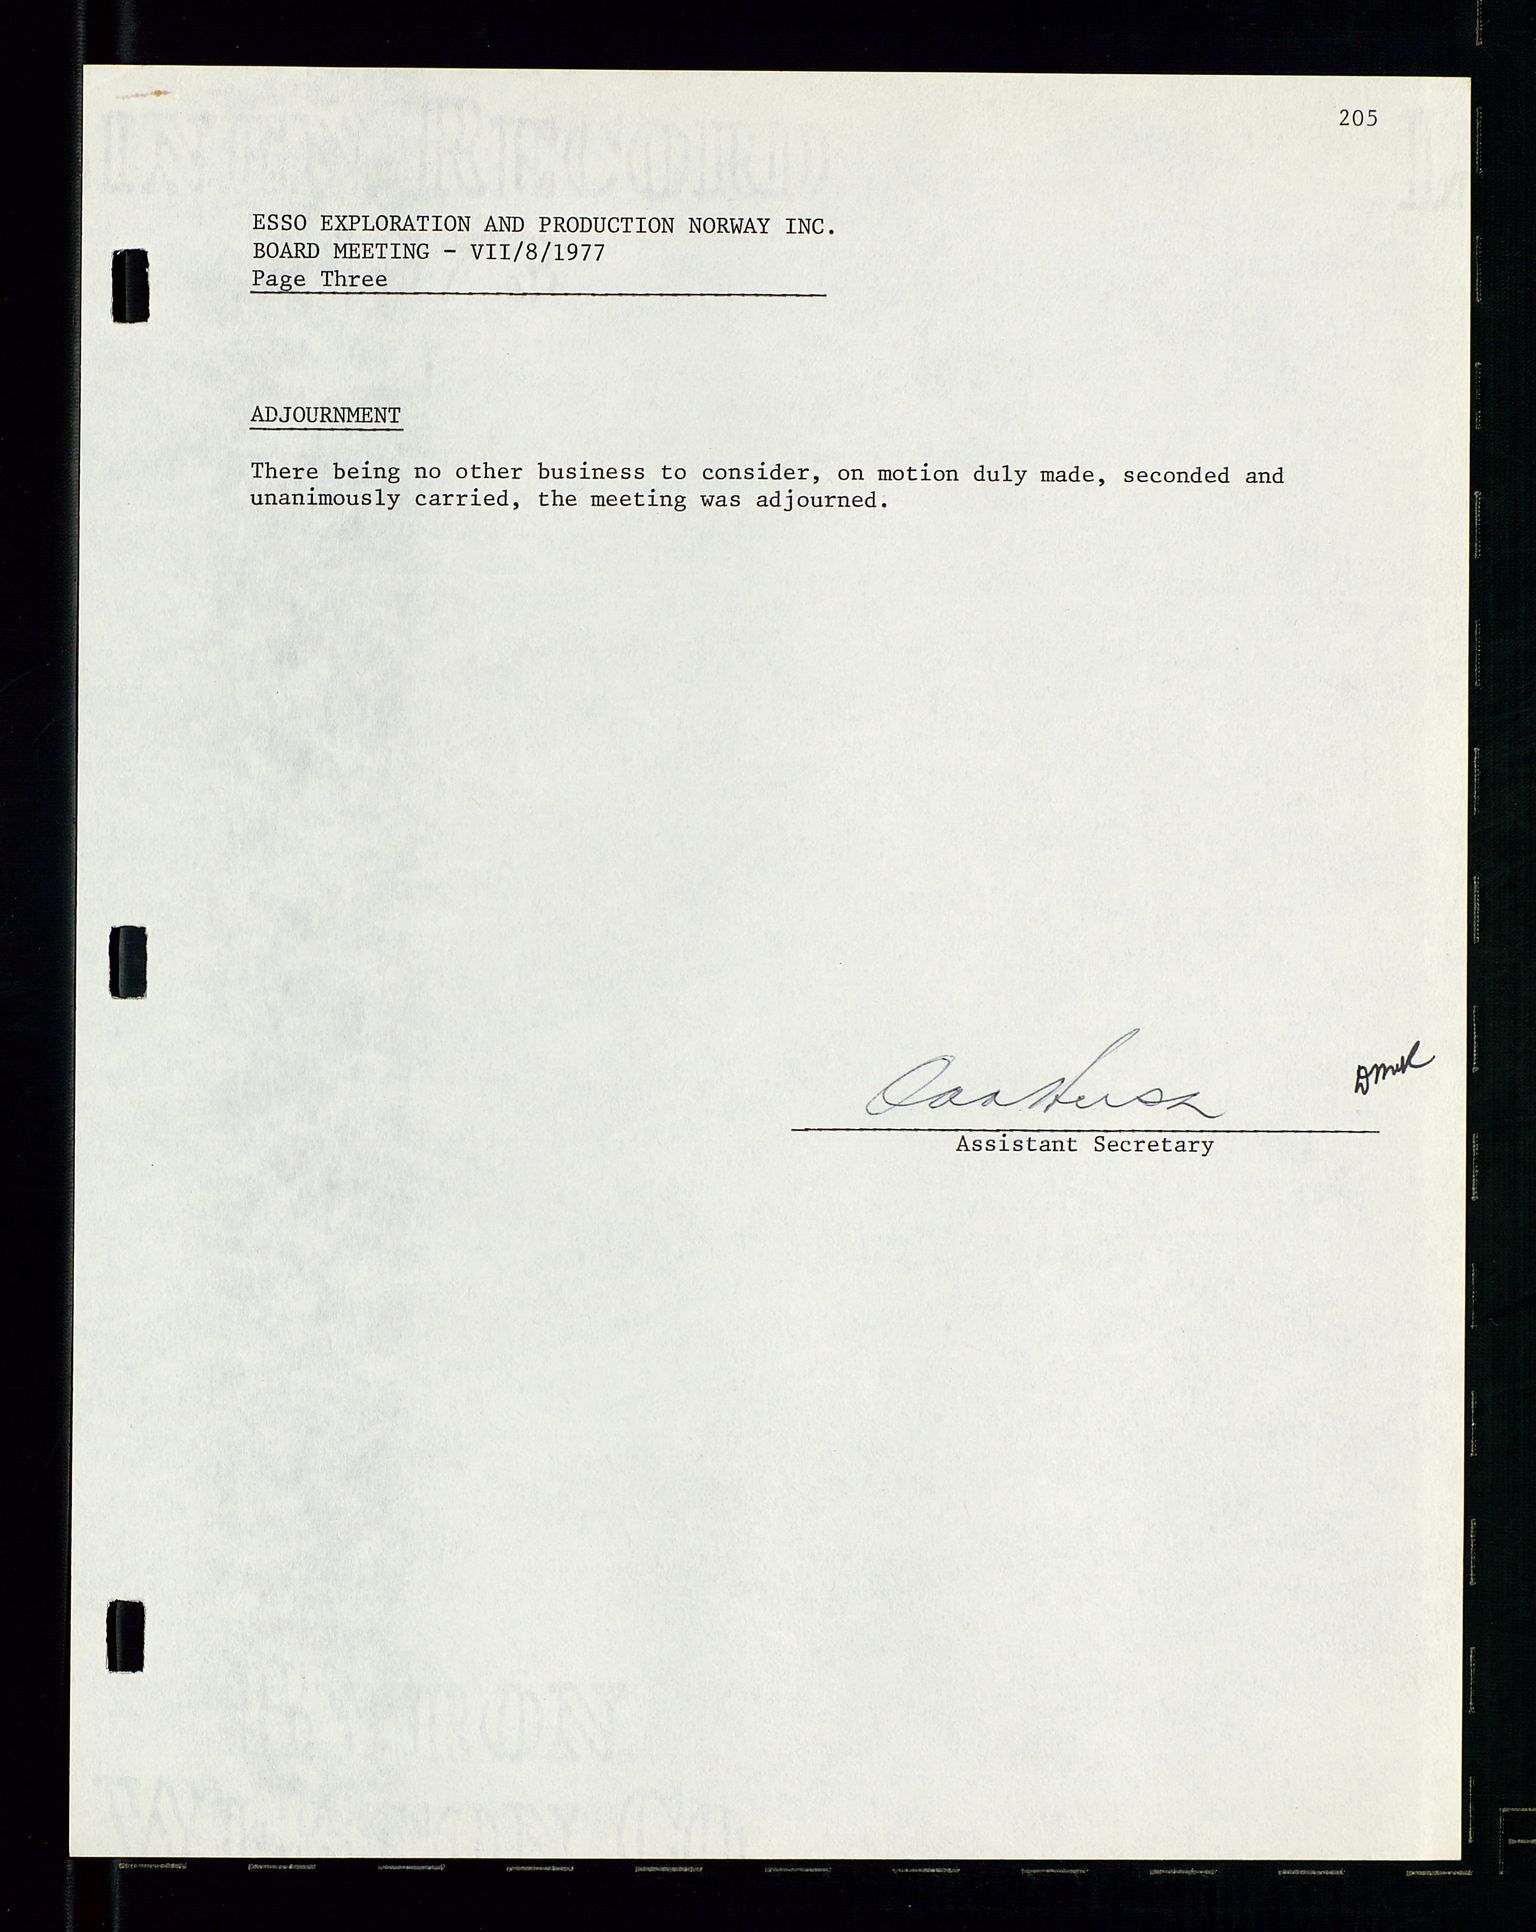 Pa 1512 - Esso Exploration and Production Norway Inc., SAST/A-101917/A/Aa/L0001/0002: Styredokumenter / Corporate records, Board meeting minutes, Agreements, Stocholder meetings, 1975-1979, p. 56